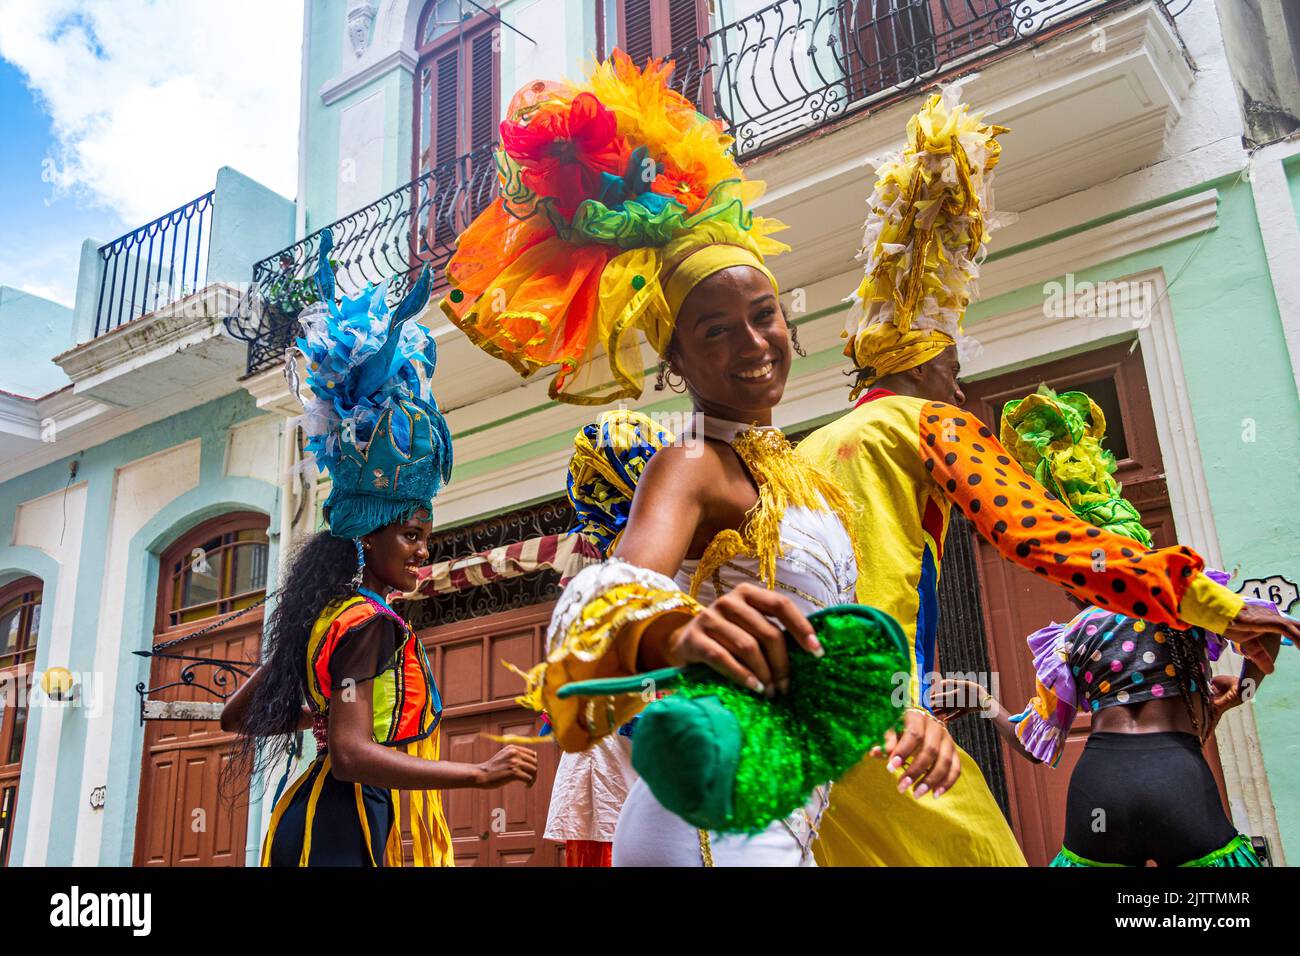 A group of Cuban entertainers and musicians stilt walk their way around downtown, Havana, Cuba, performing for both locals and tourists. Stock Photo